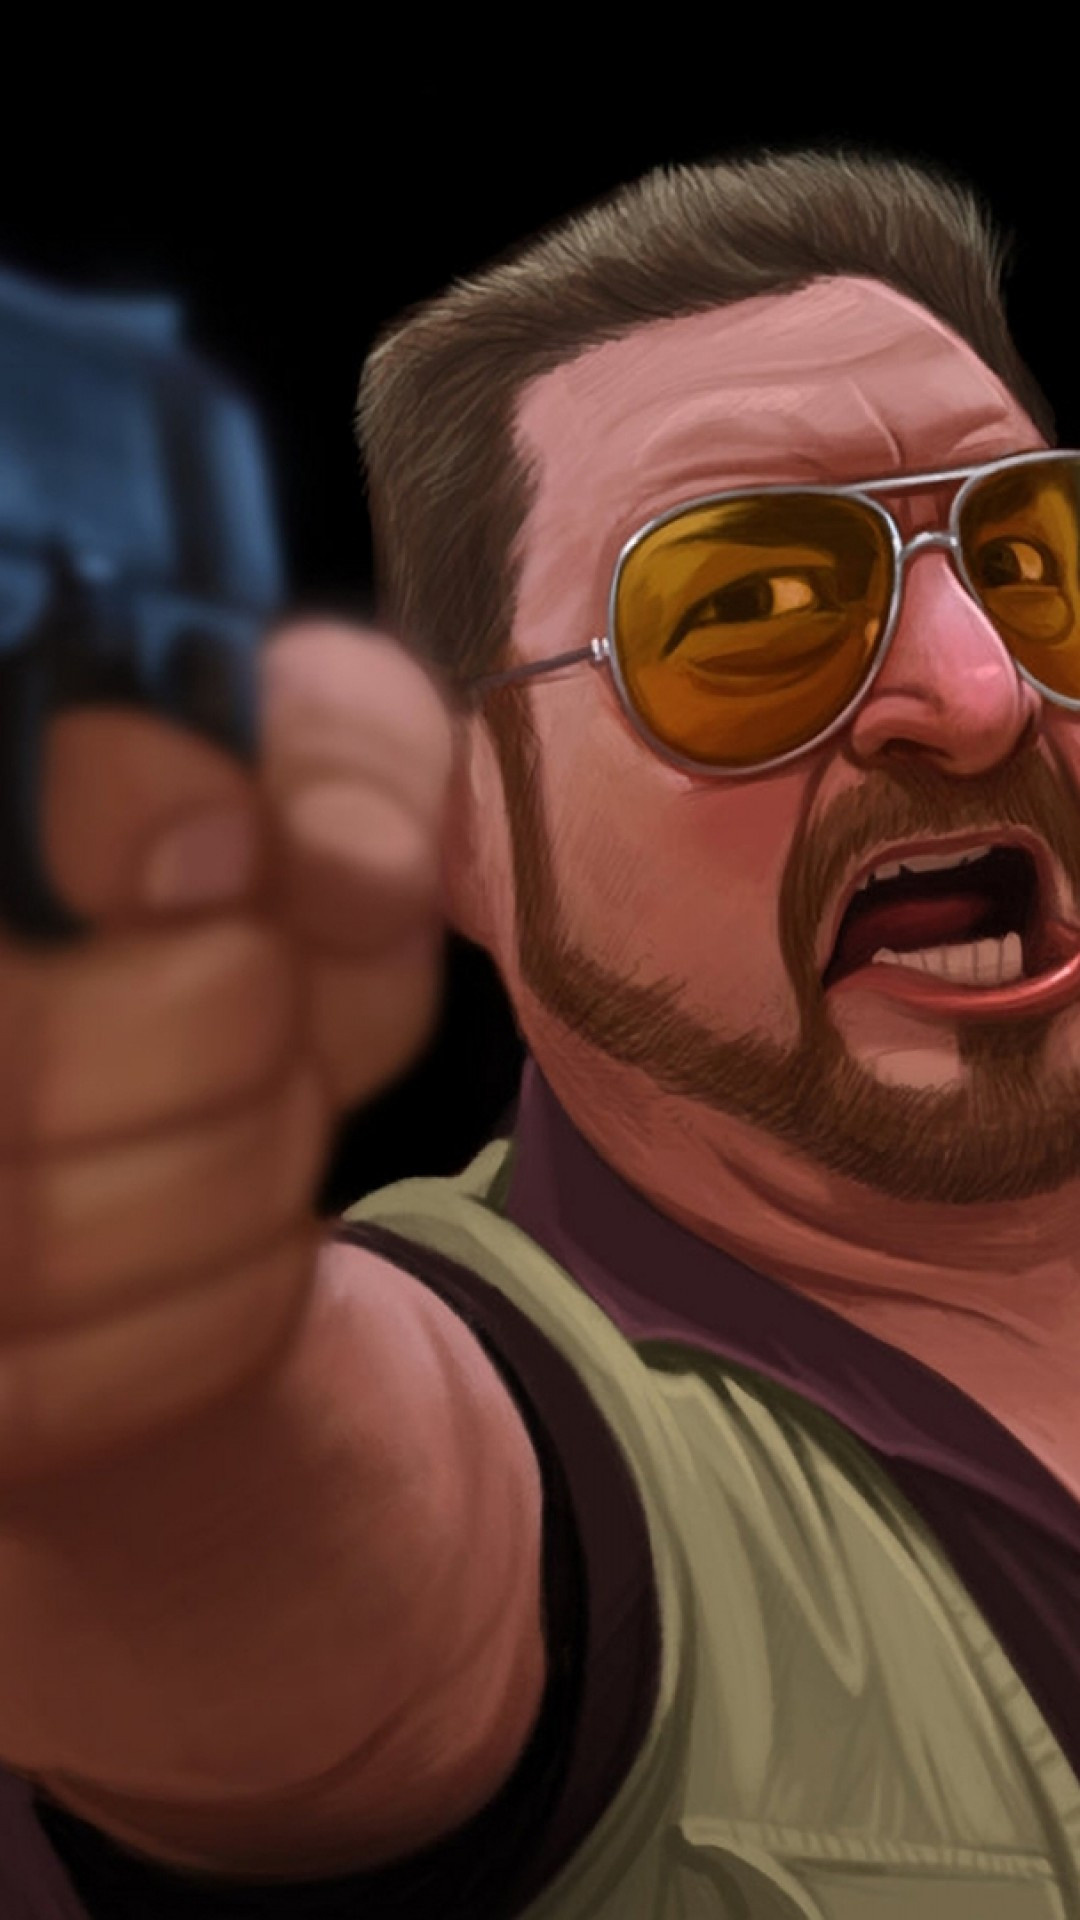 Walter Sobchak artwork, The Big Lebowski wallpapers, Artistic backgrounds, Quirky characters, 1080x1920 Full HD Phone